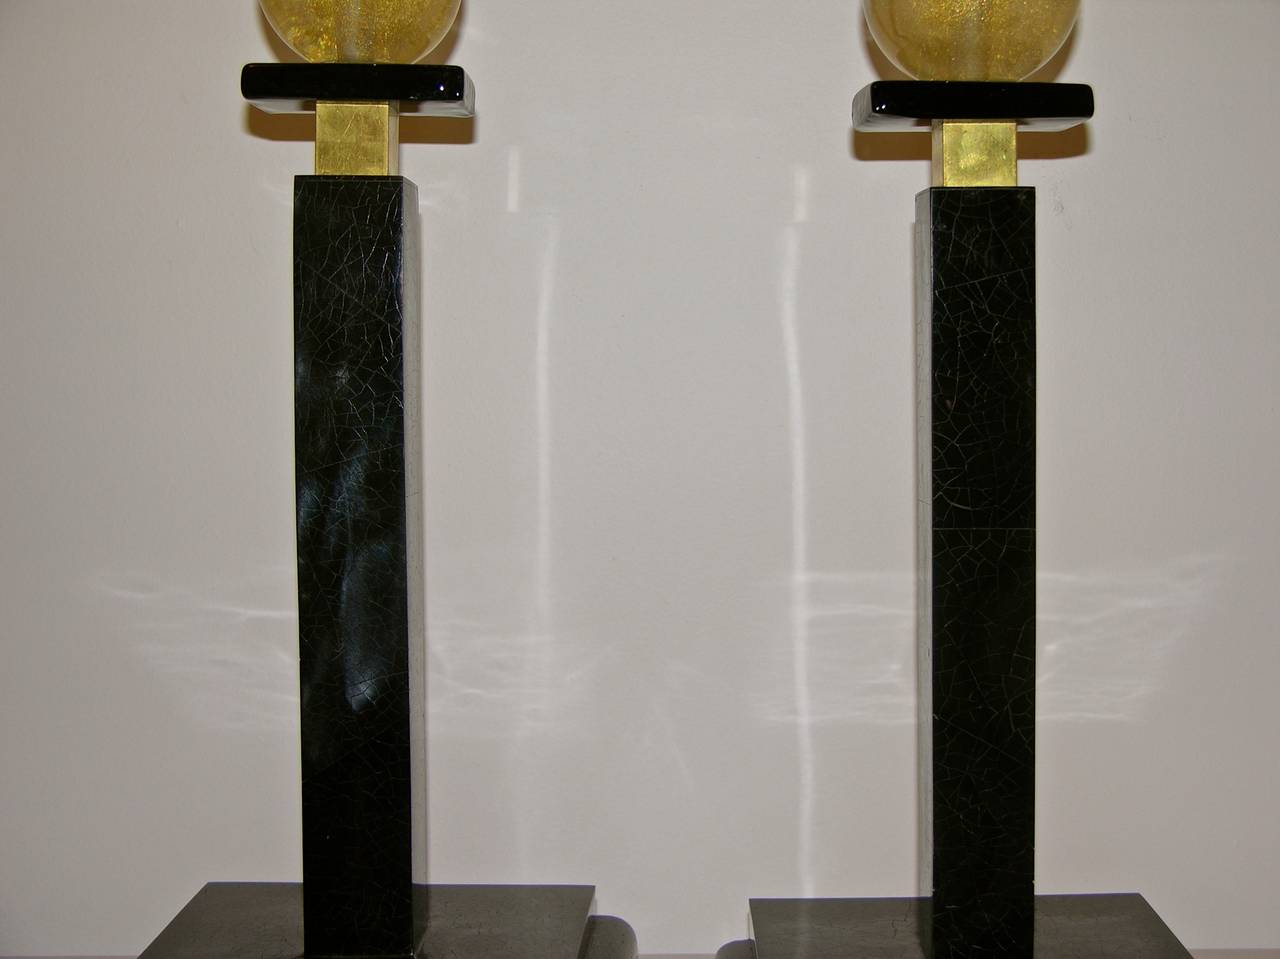 Brass 1970s Italian Pair of Art Deco Design Lamps with Murano Glass Shades by Barovier